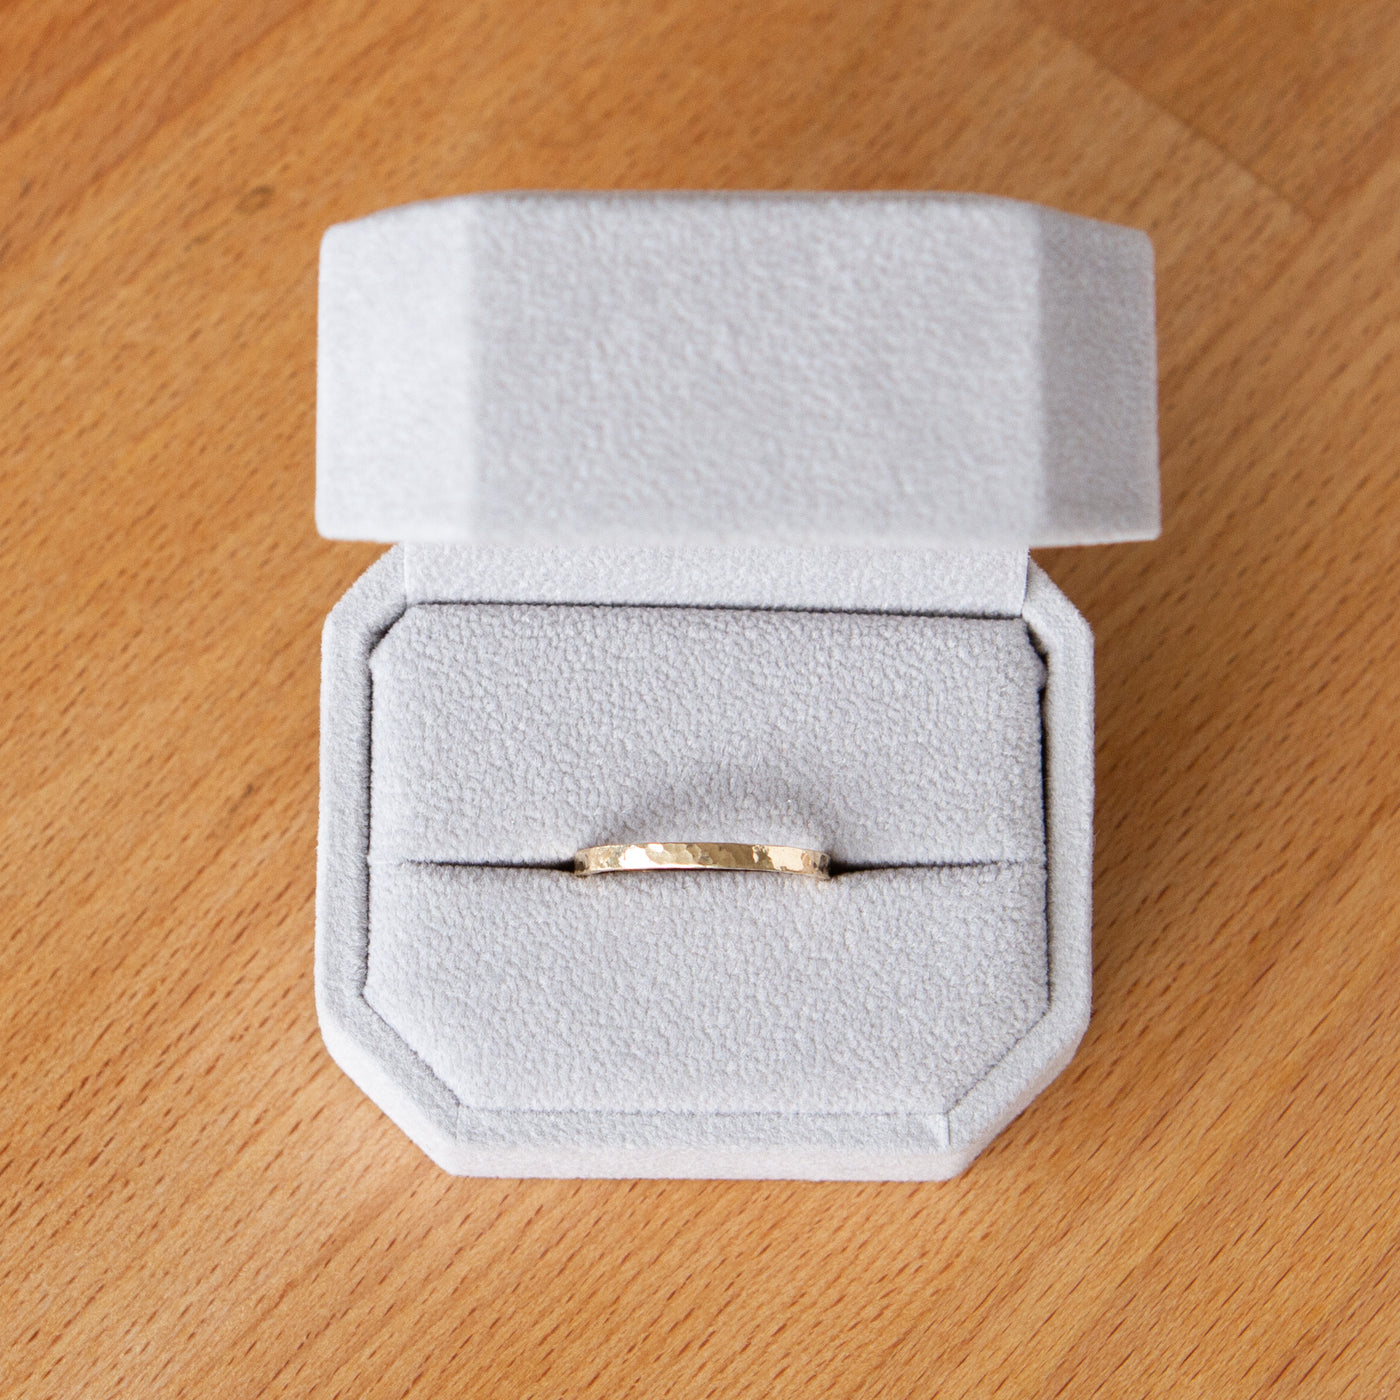 Flat hammered yellow gold wedding band in a ring box